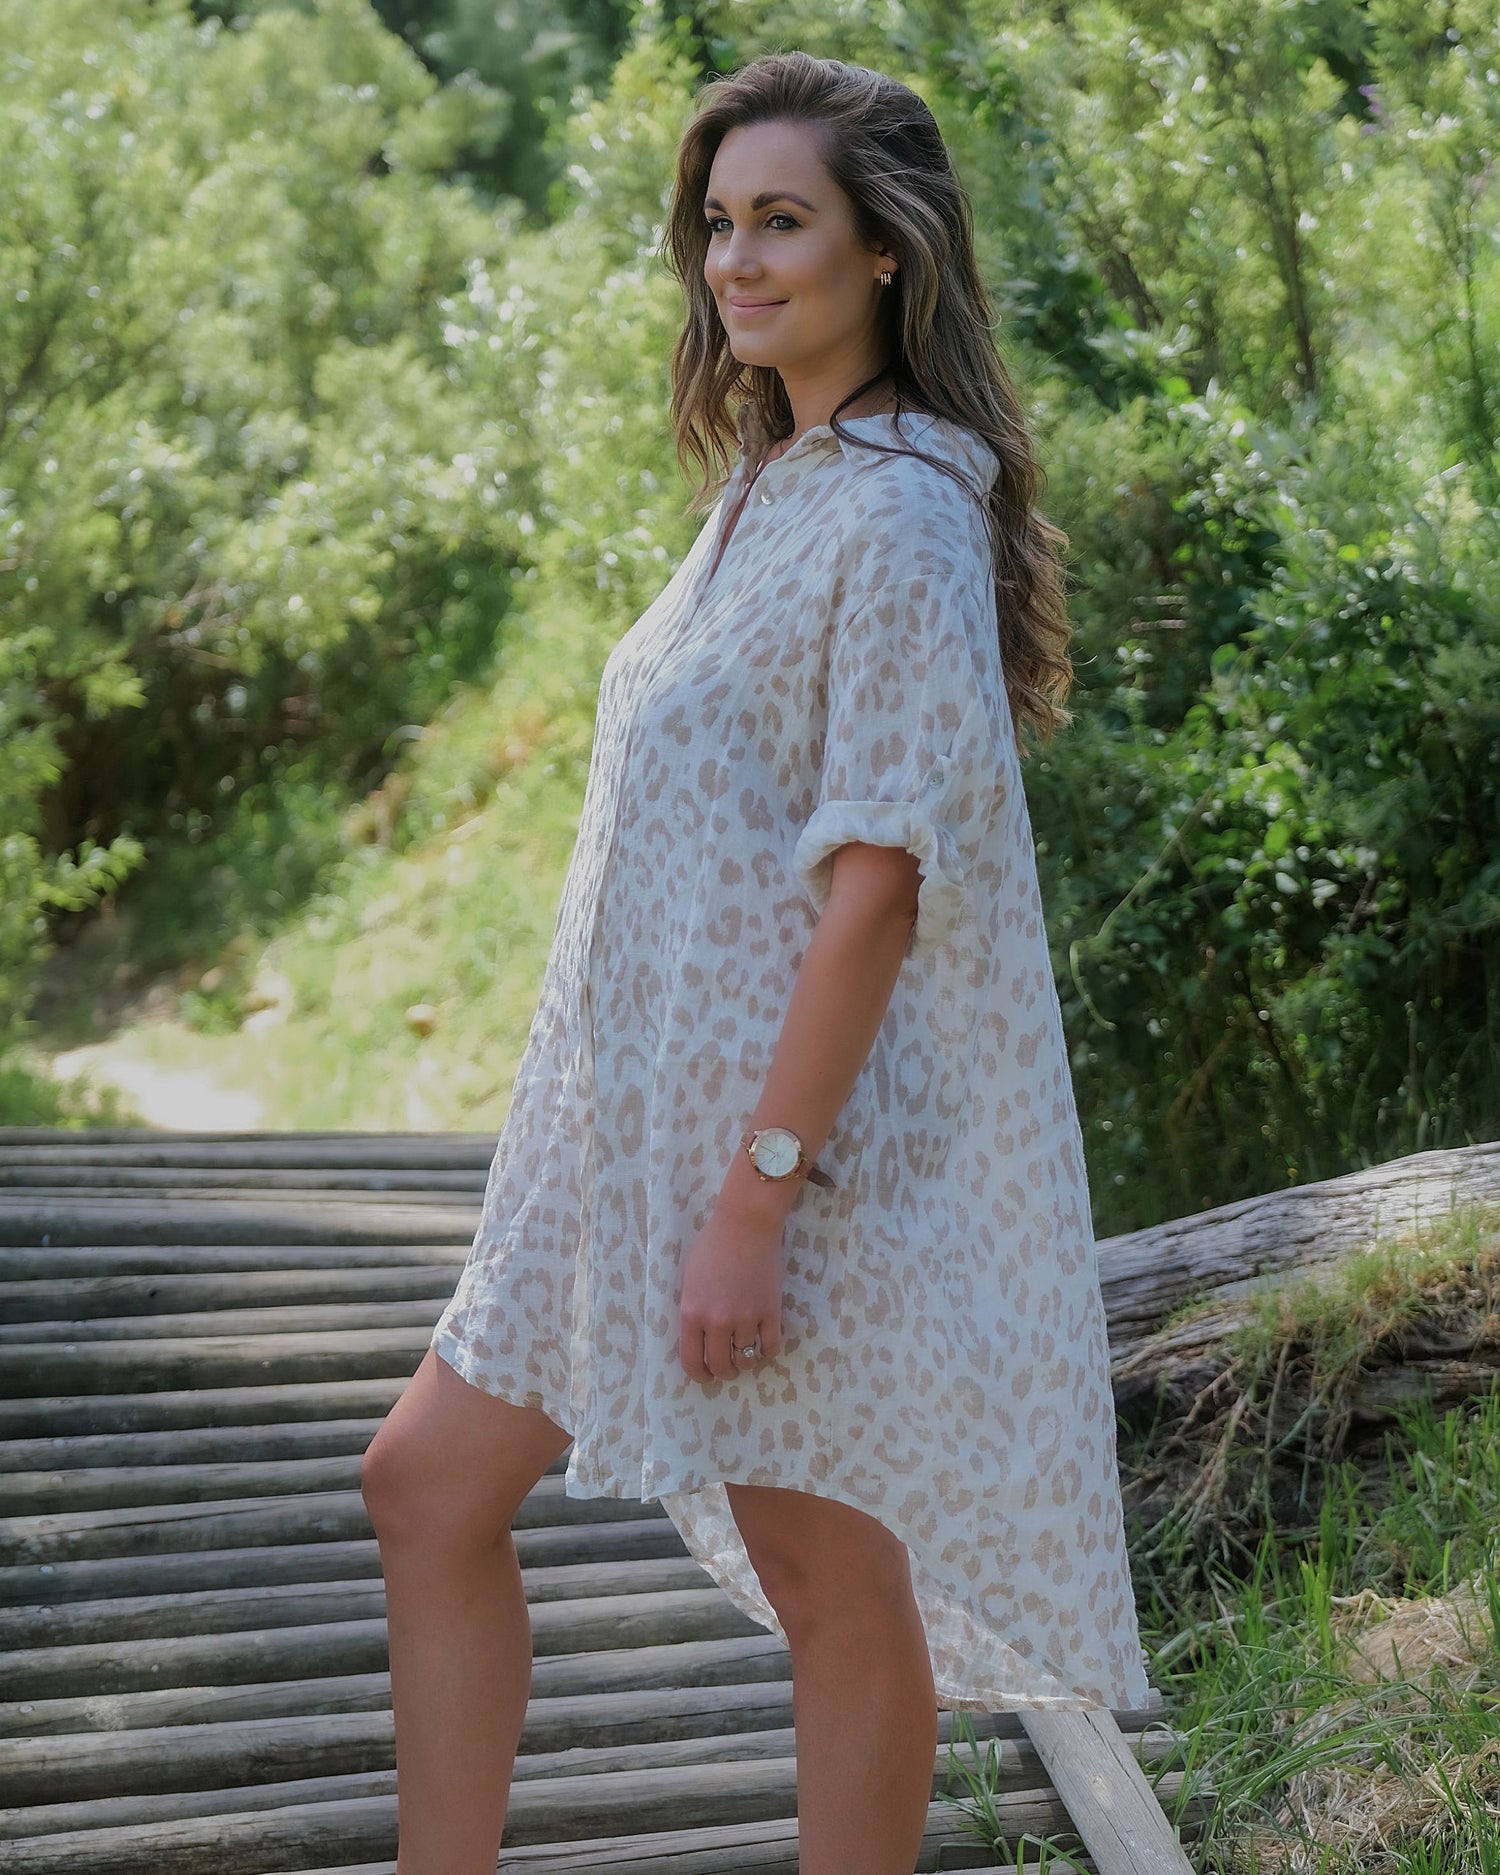 Embrace effortless elegance of this lovely linen dress. The subtle animal print, tastefully incorporated into the fabric, adds a hint of wild sophistication. Pair it with sandals and a sun hat for a relaxed daytime look or elevate it with heels and statement jewelry for a more formal affair